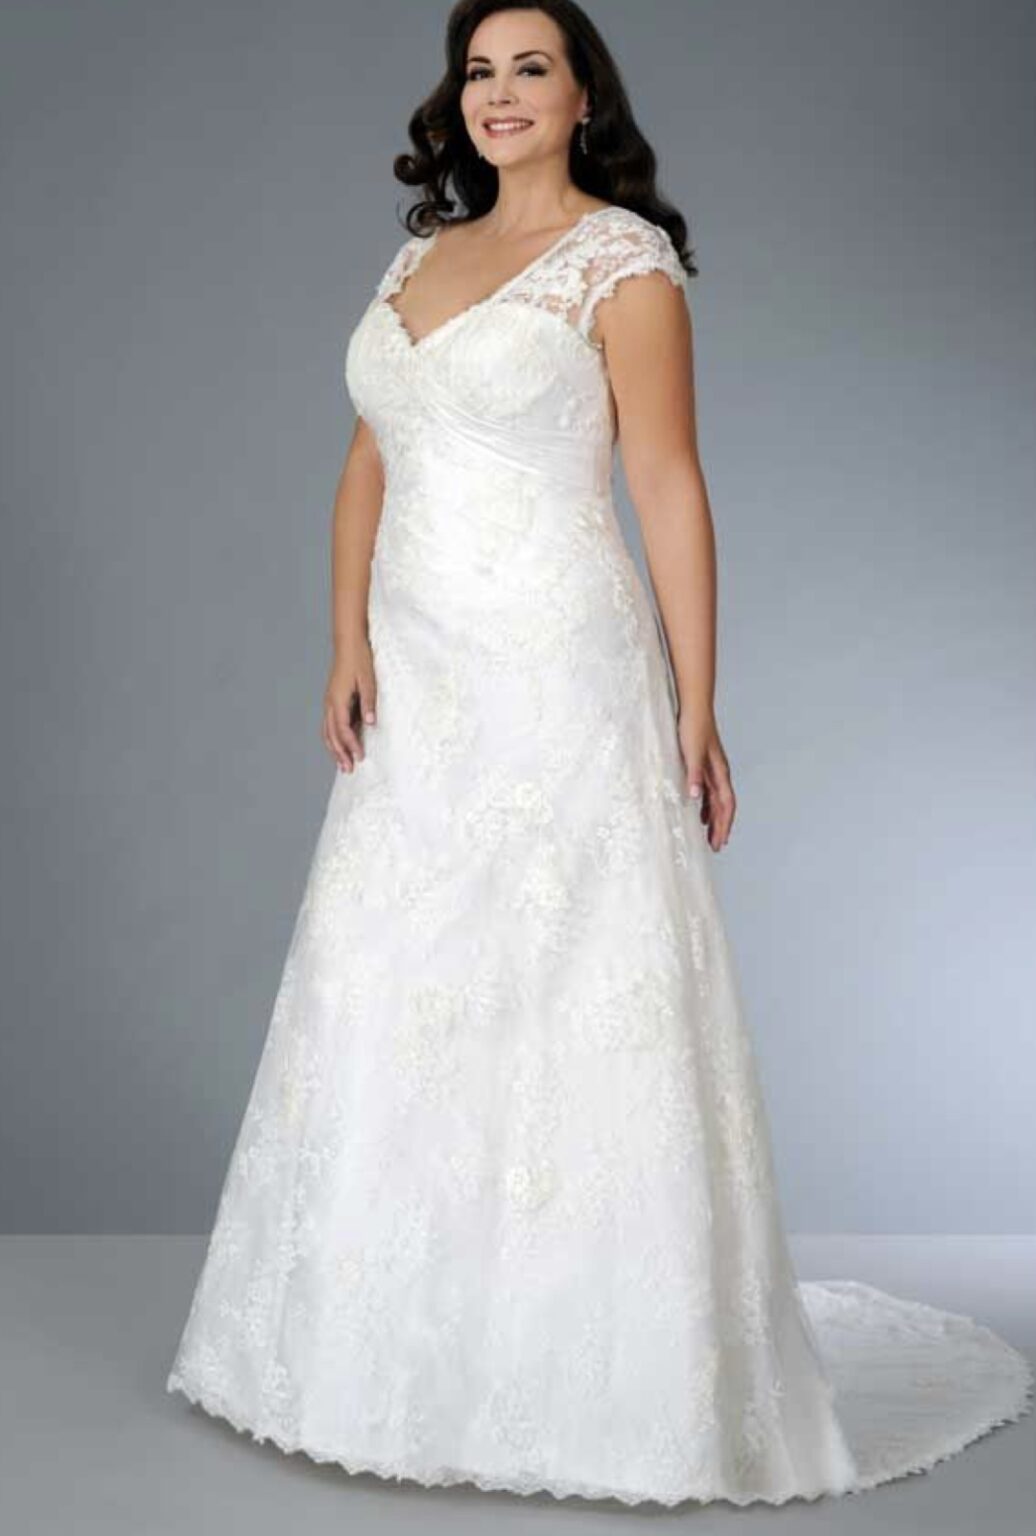 Wedding Dresses For Second Marriage Over 50 Year 1036x1536 